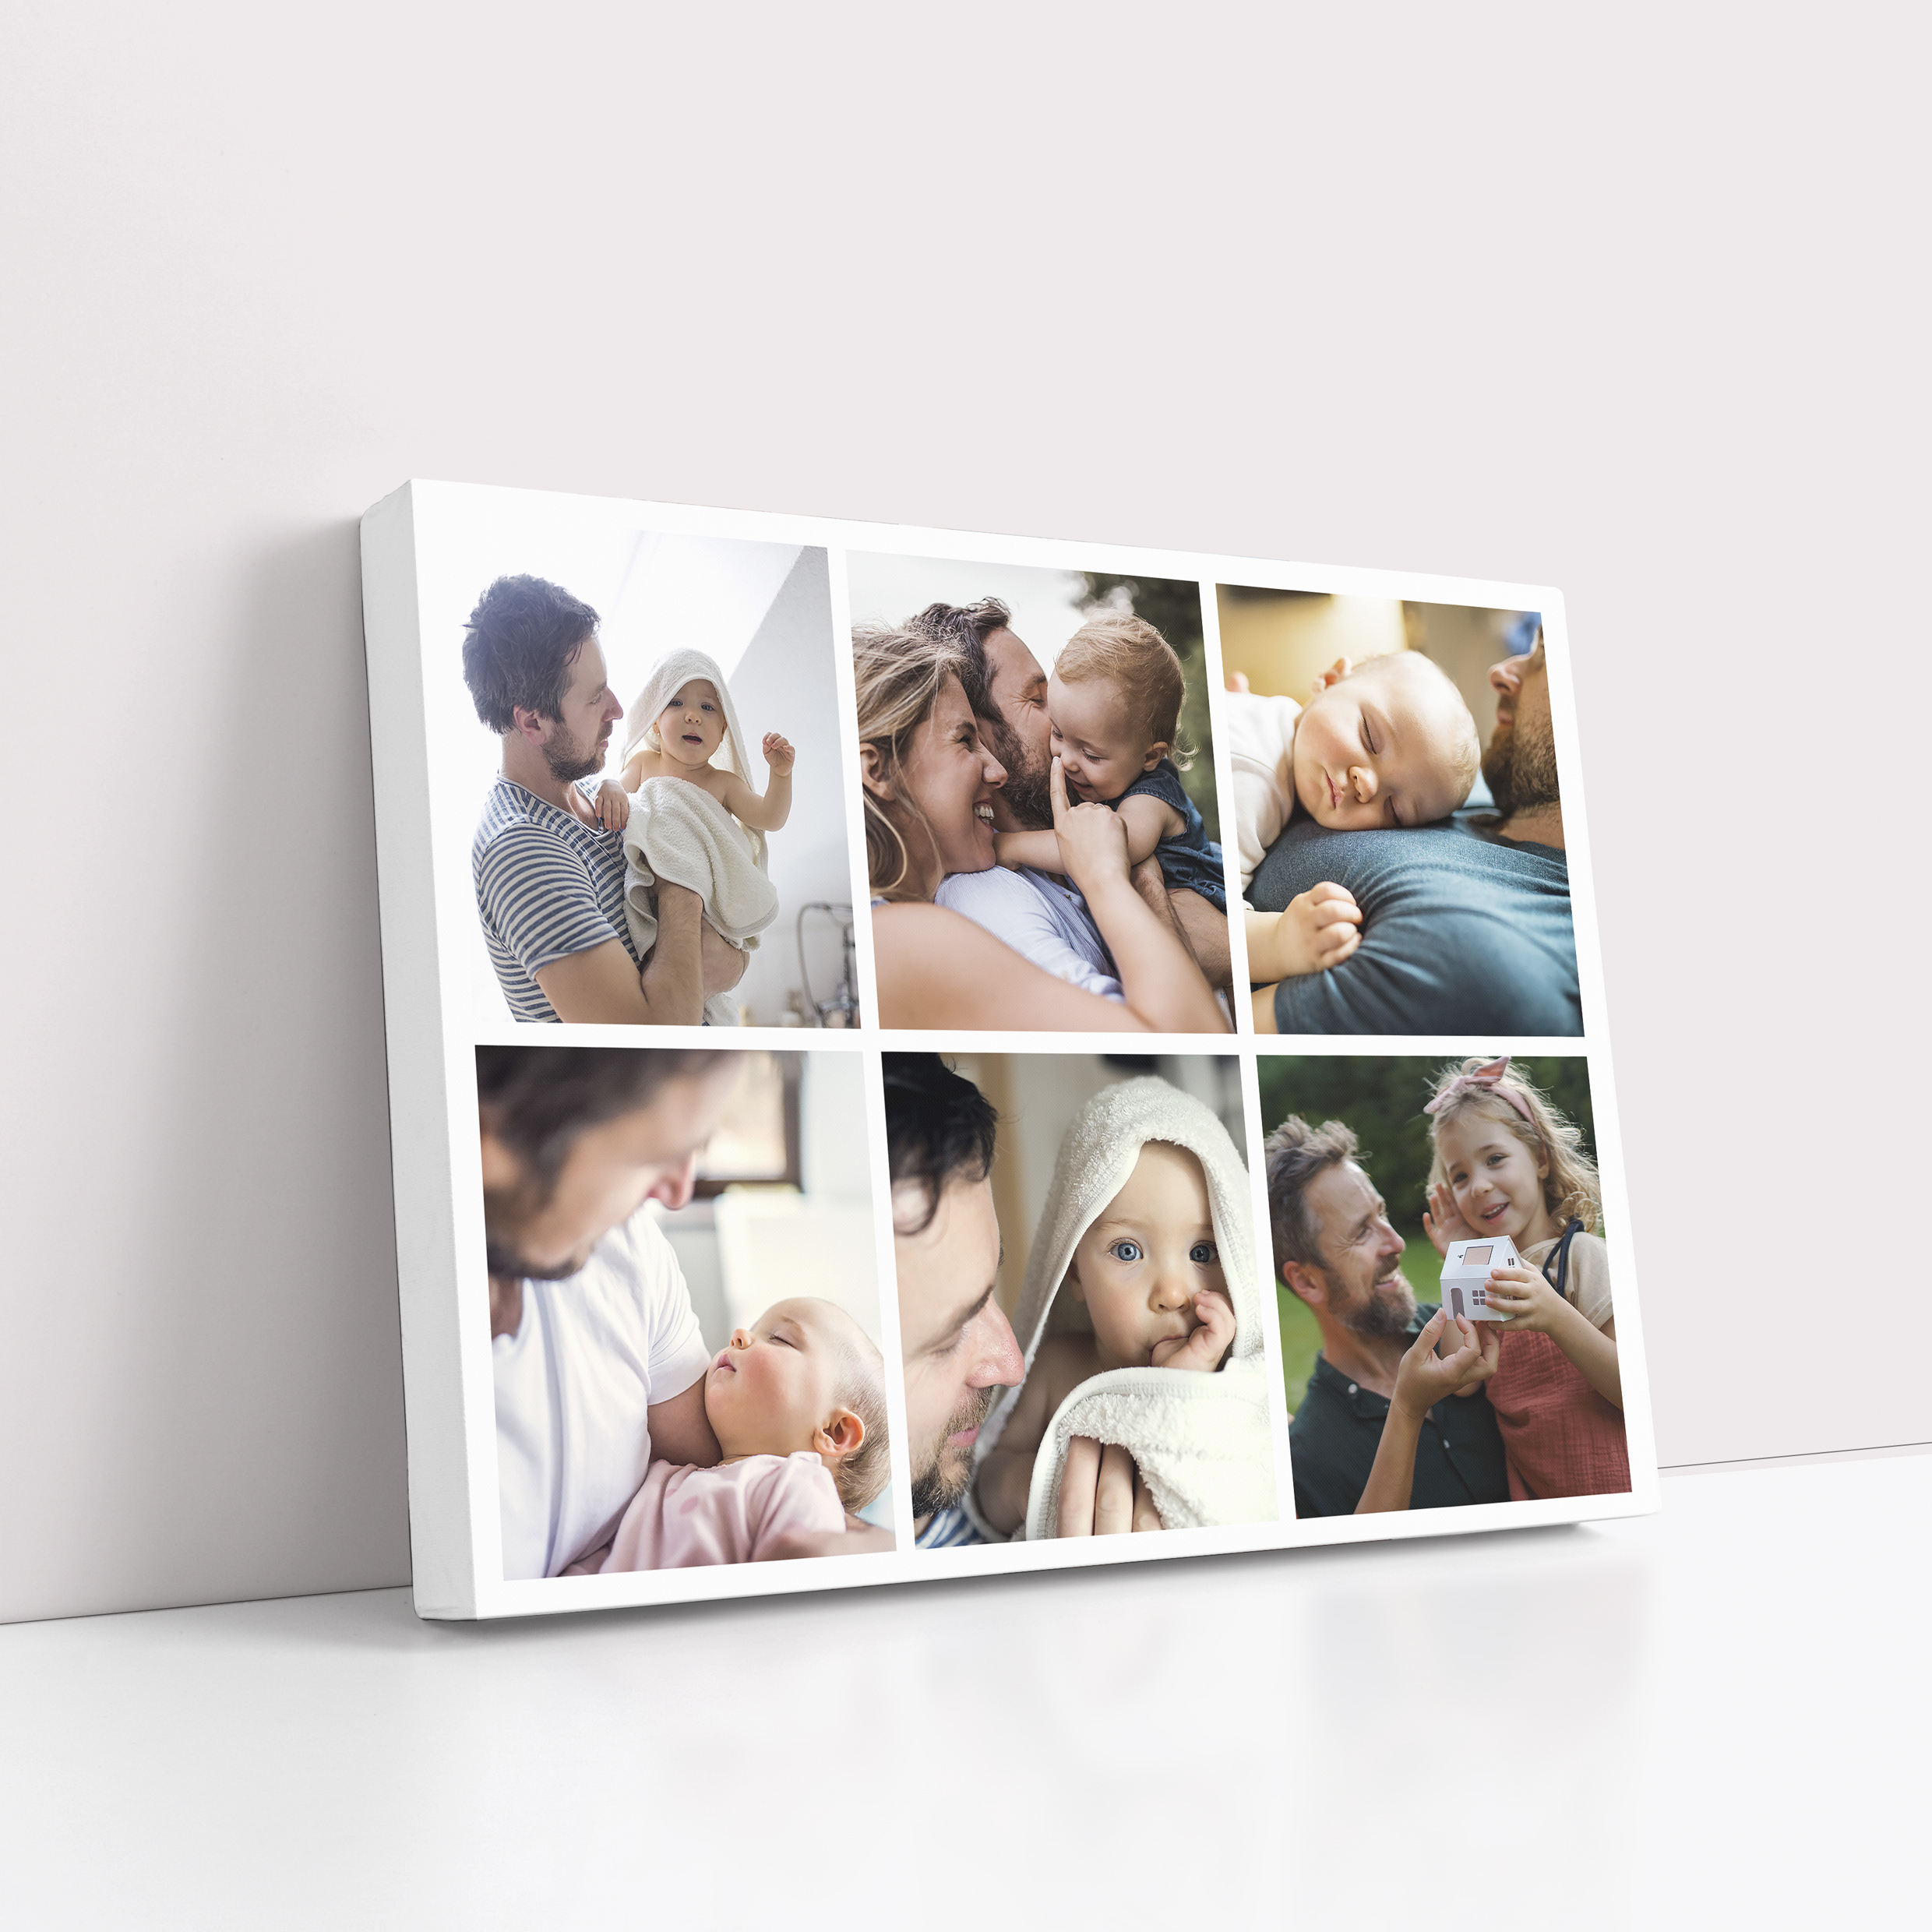 Moments Mosaic Personalised Stretch Canvas Print - A stunning canvas with space for six photos, capturing the beauty of cherished moments with vibrant, lasting impressions.